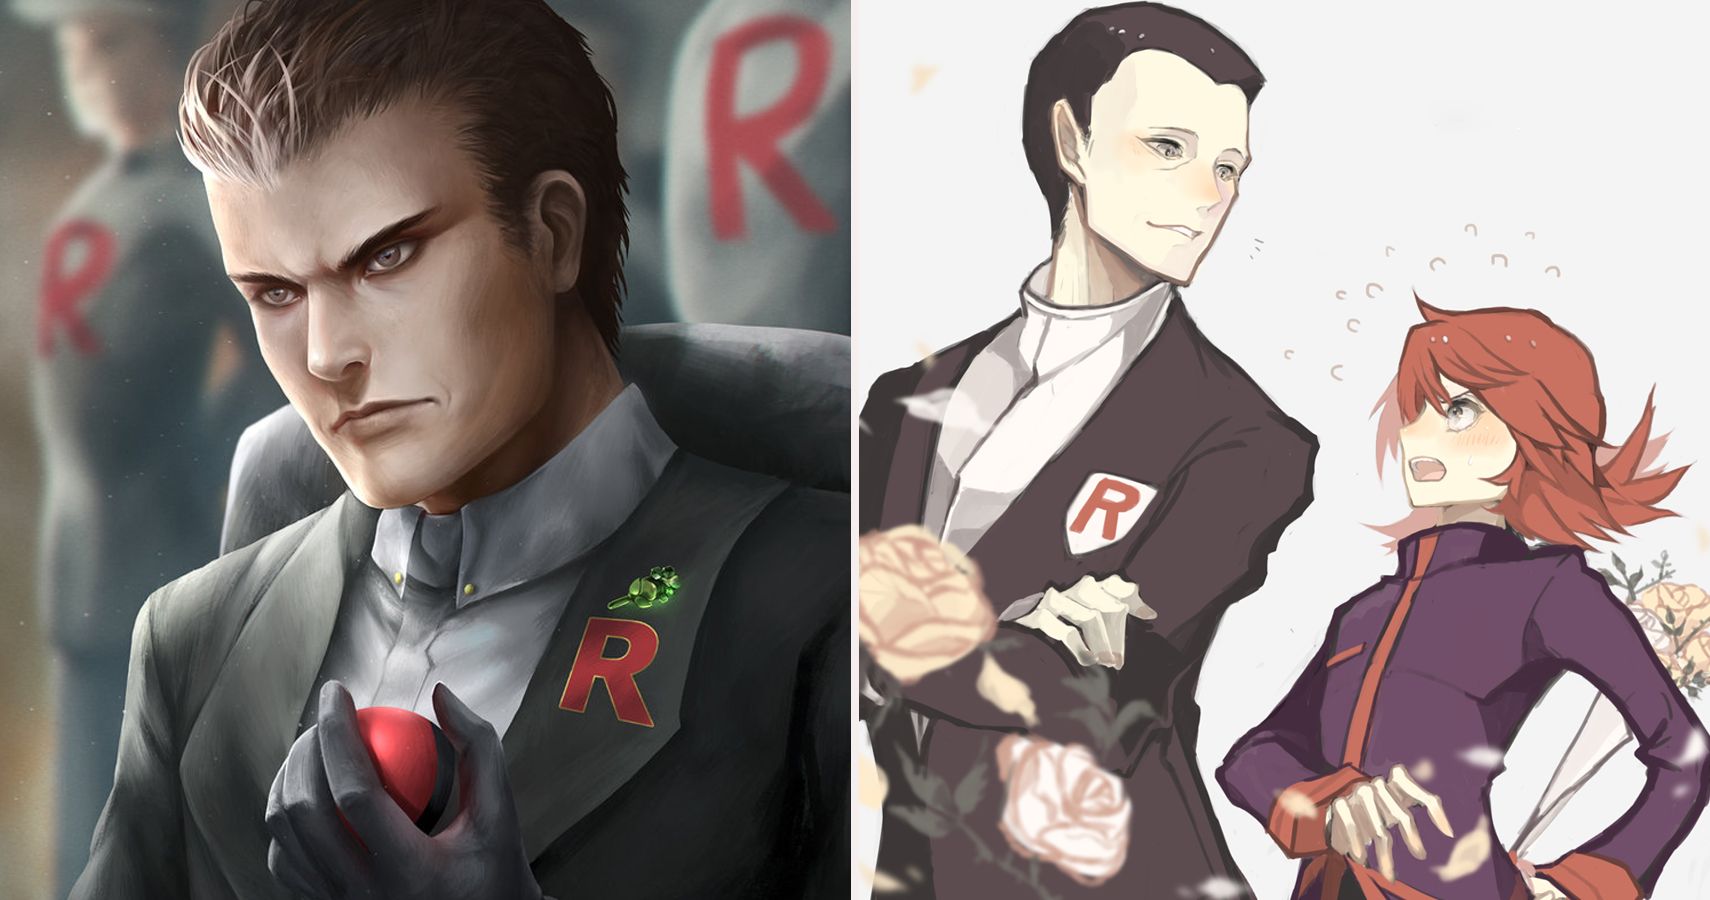 giovanni fire force unmasked | Discover